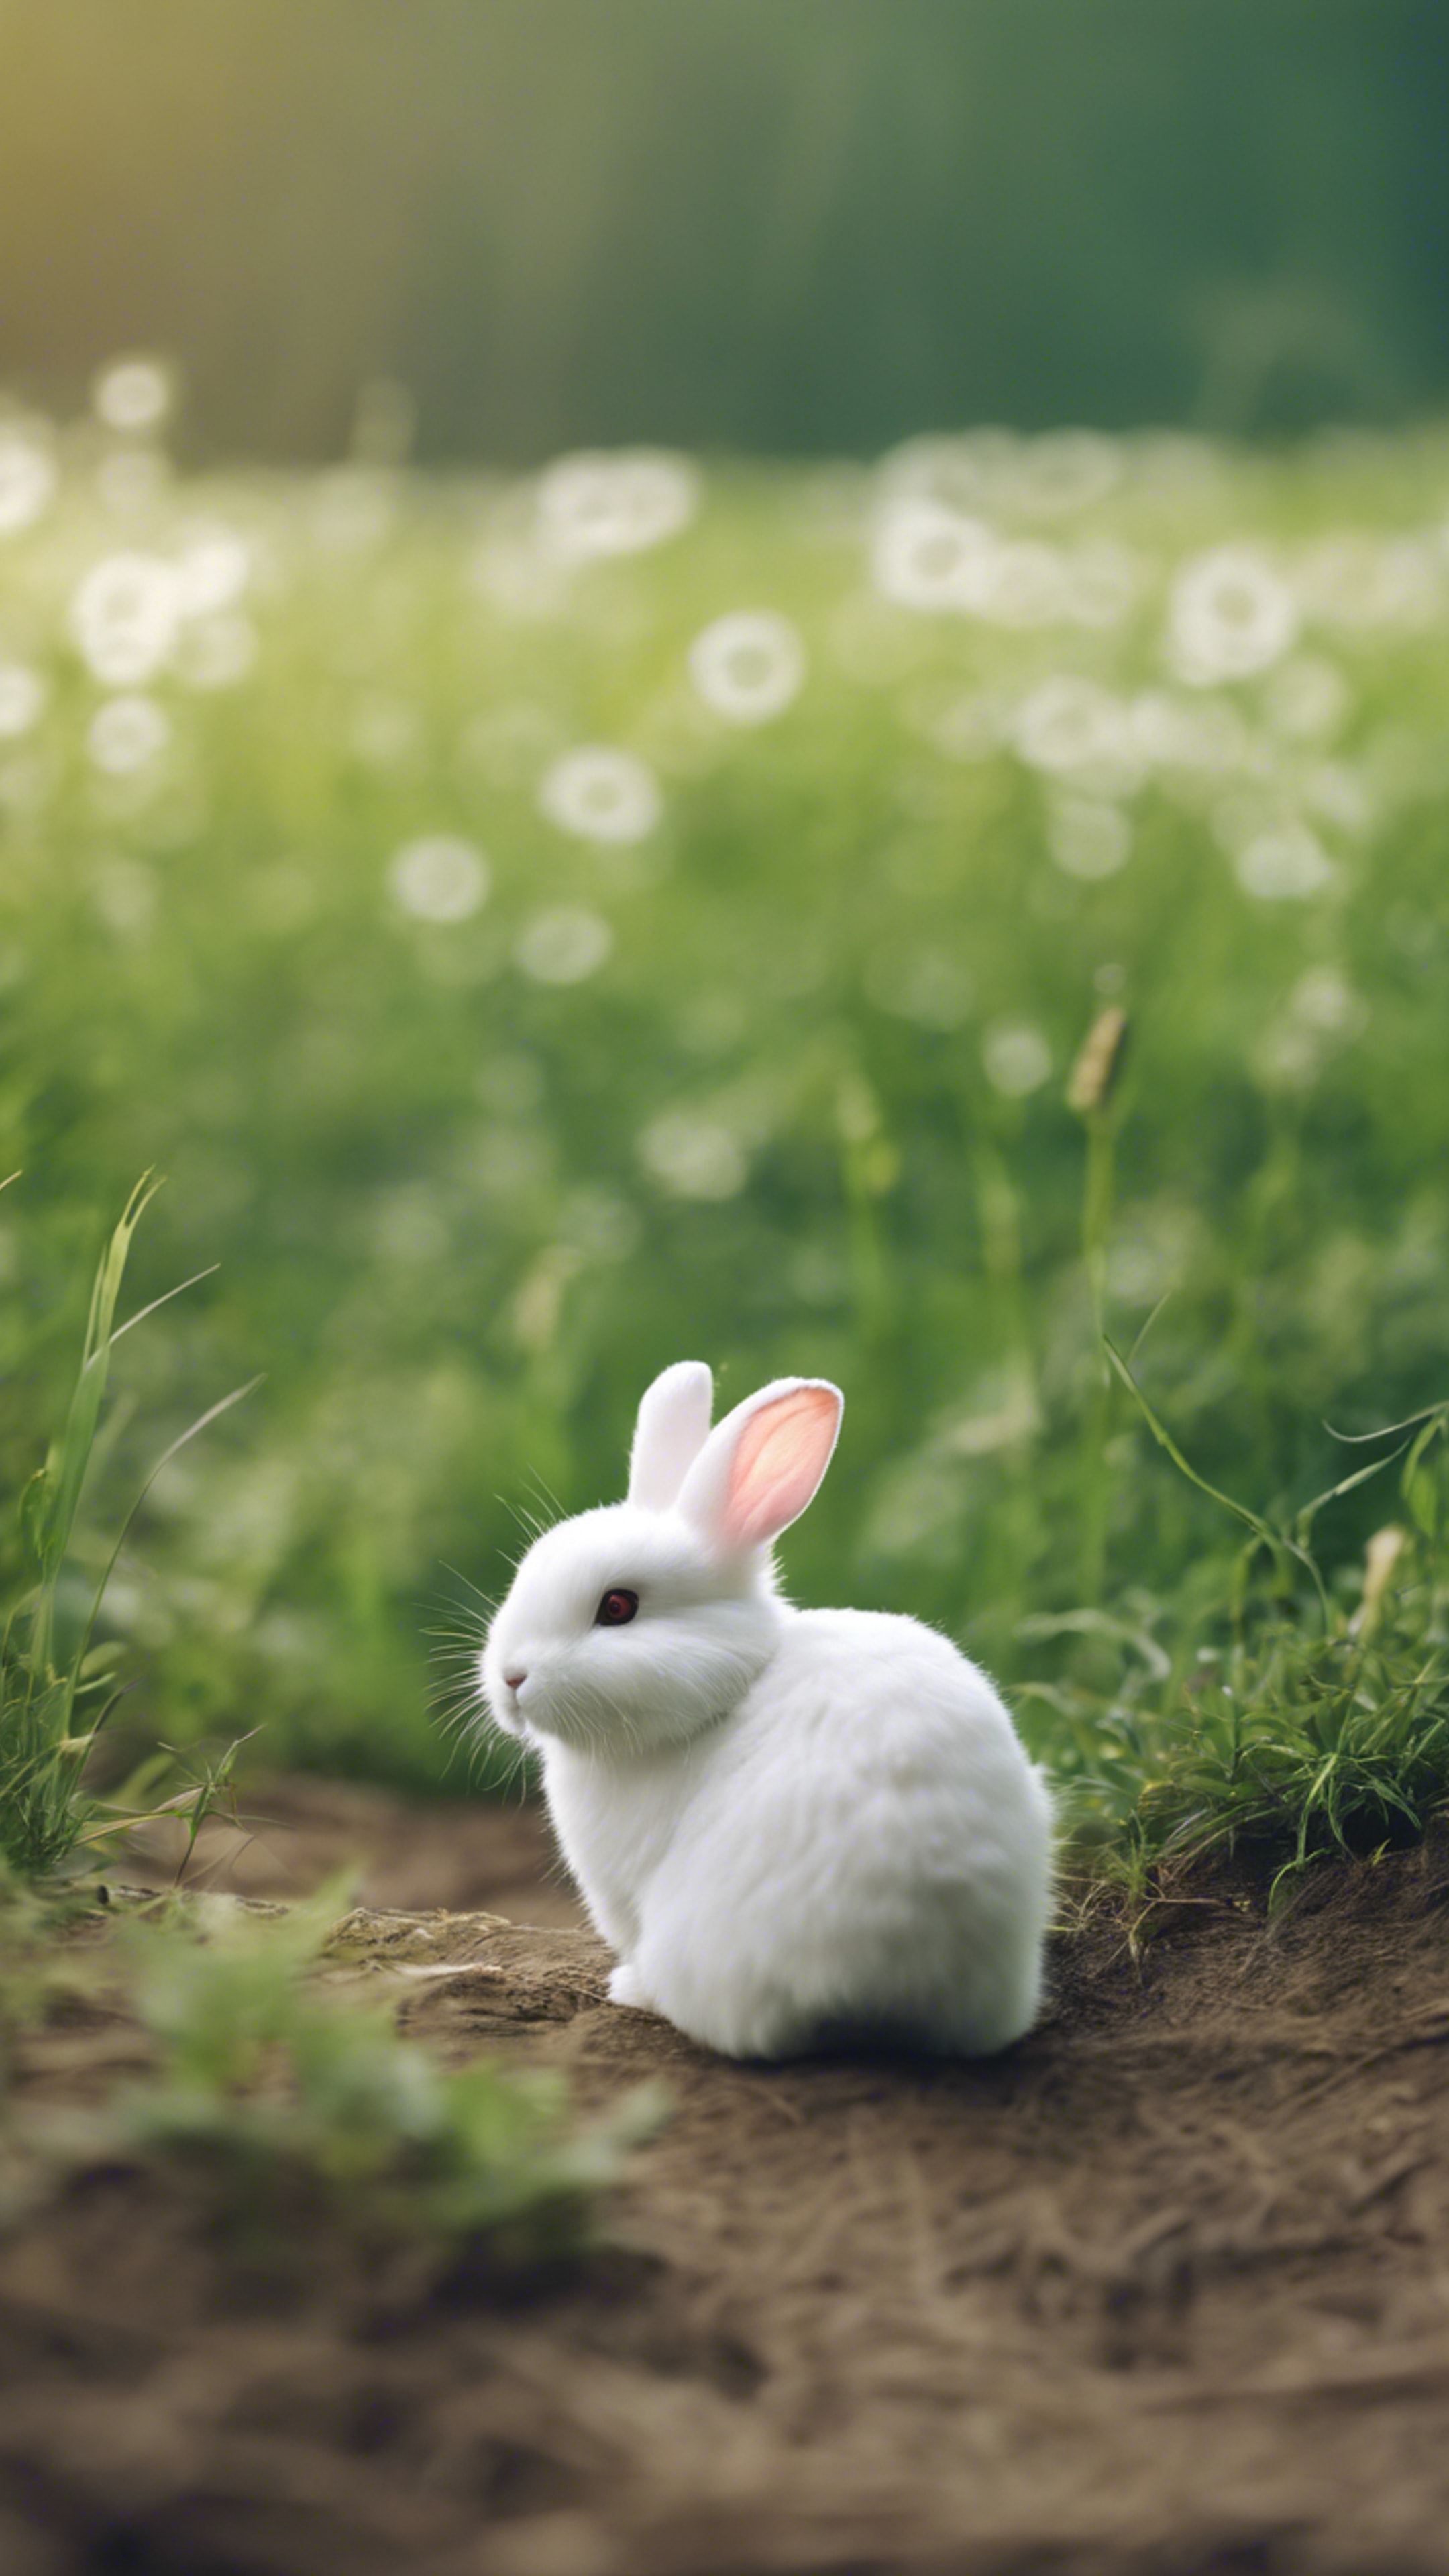 A kawaii white rabbit on a green field, fluffy tail flickering in the wind. Hình nền[1912d35368704584b61e]